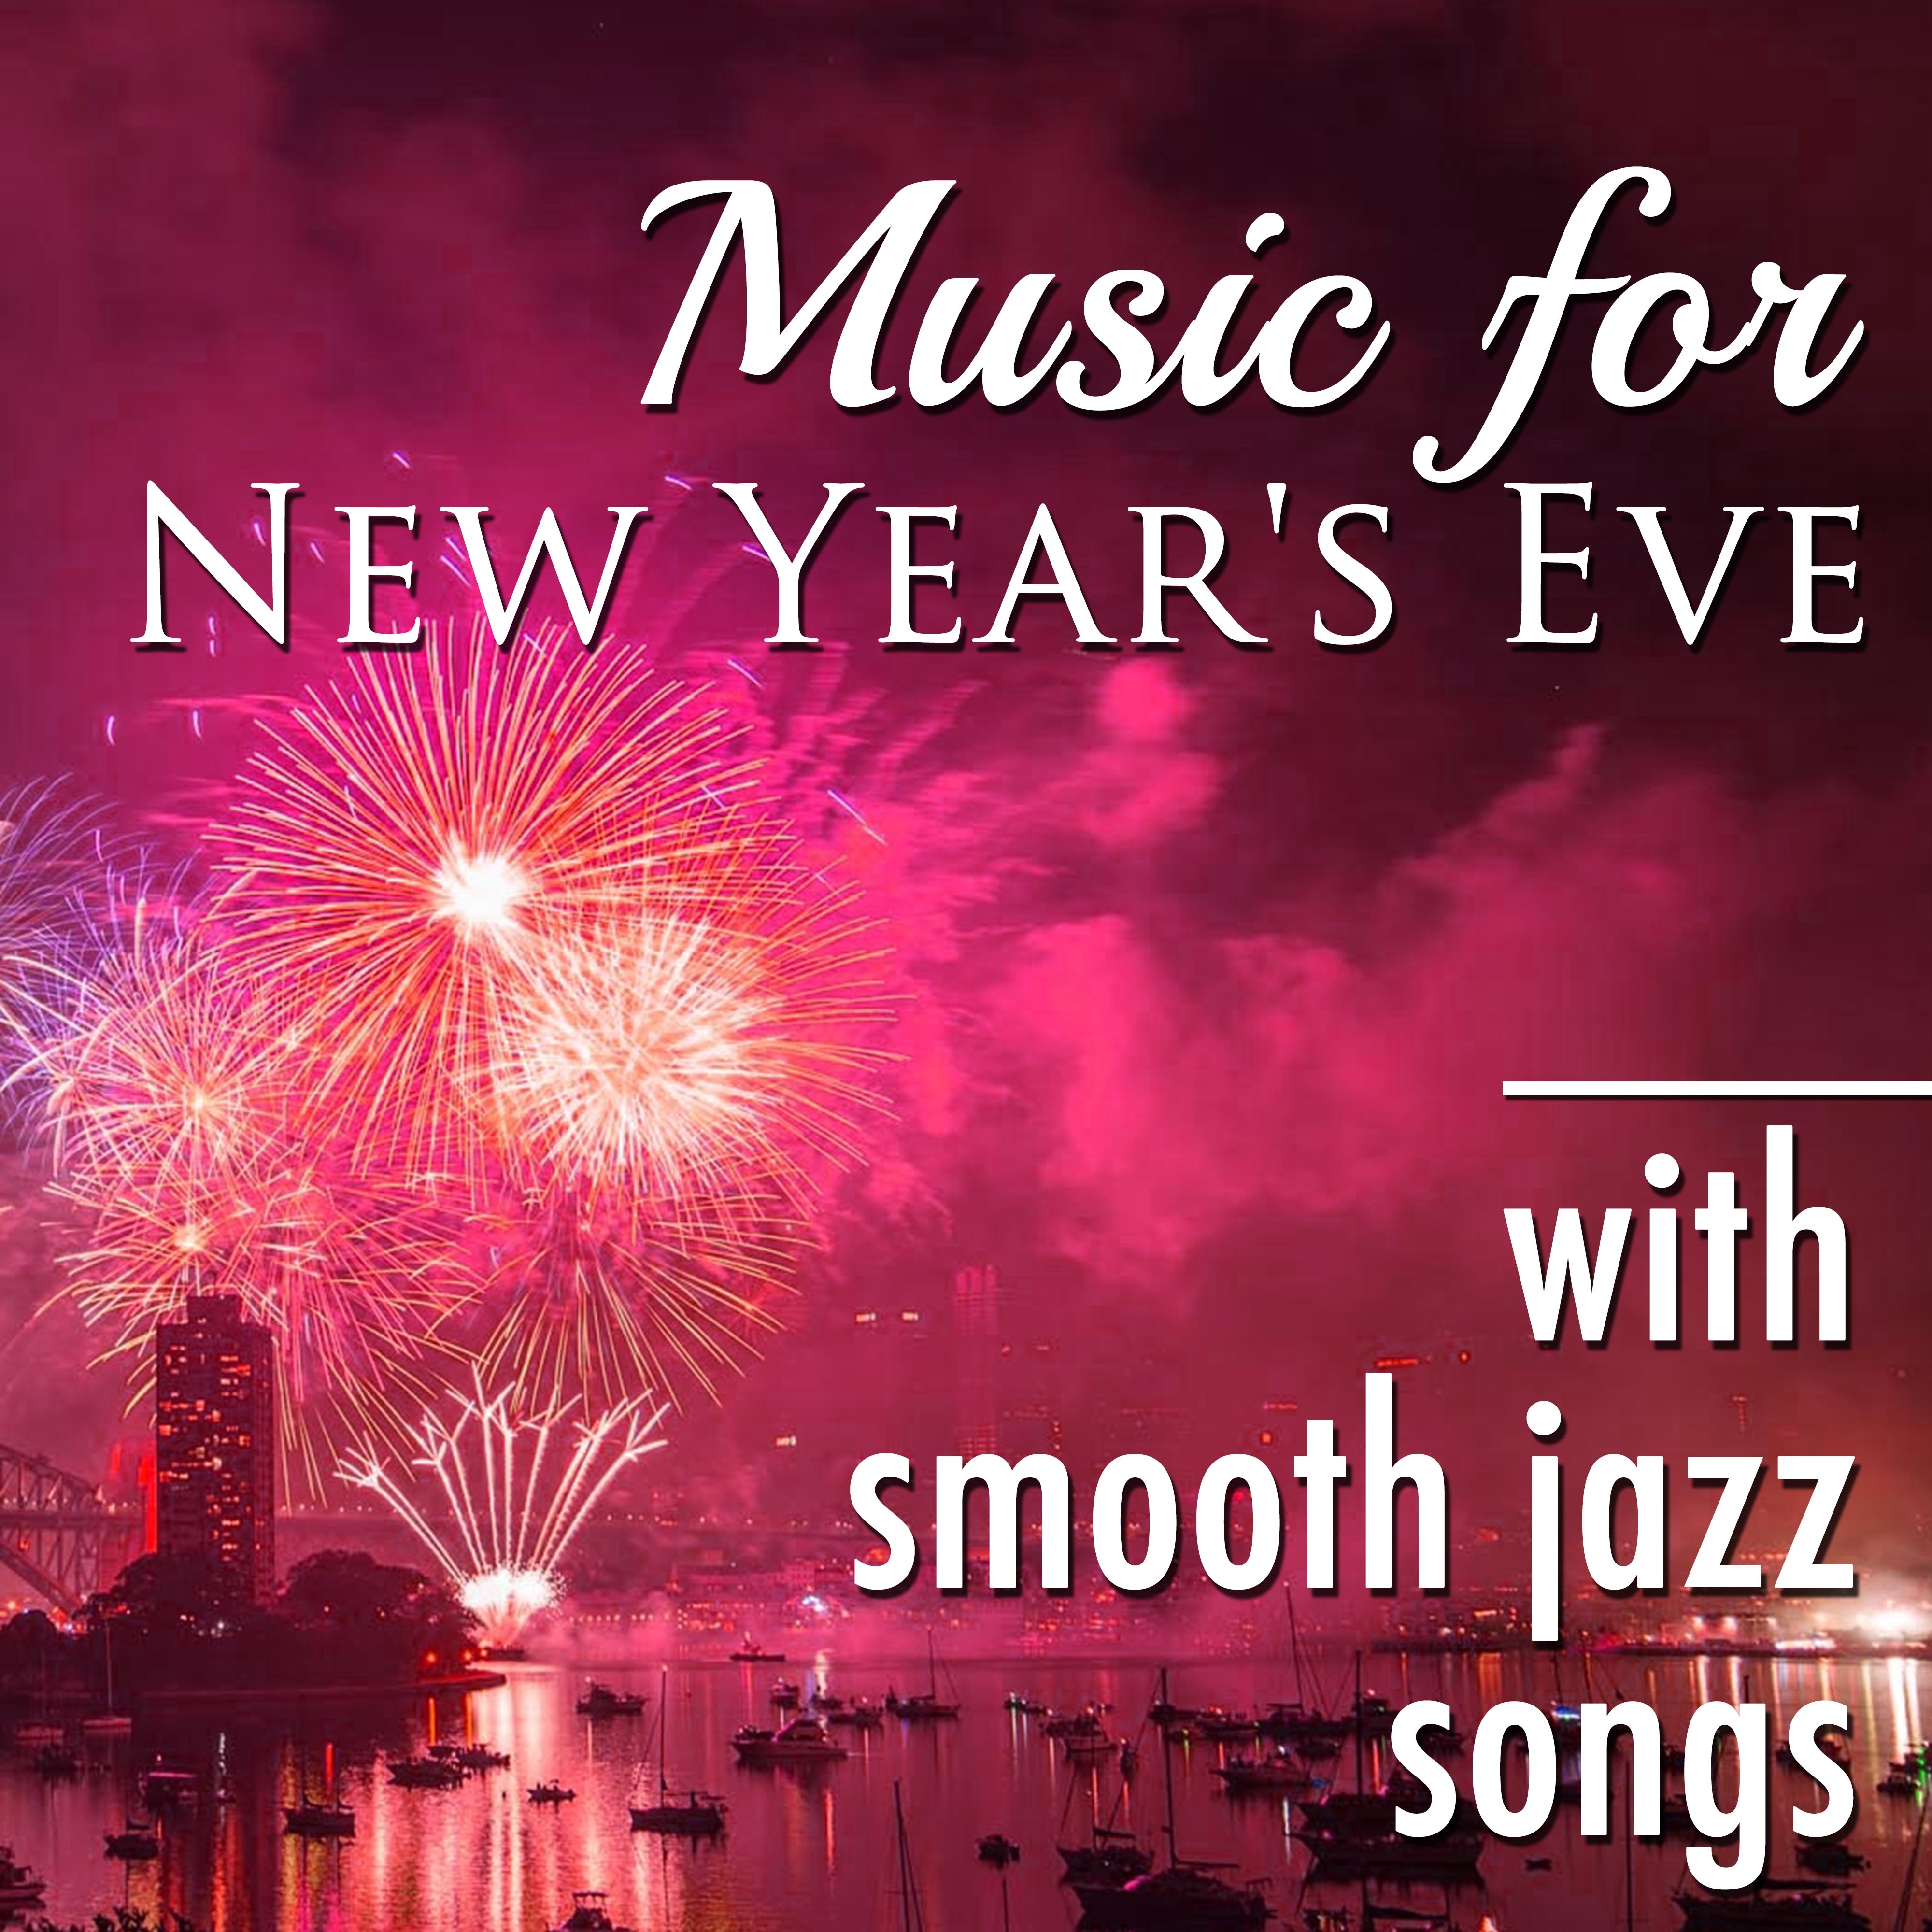 Music for New Year's Eve: Instrumental Smooth Jazz Lounge Songs to Soothe the Mind and to Destress Right Now